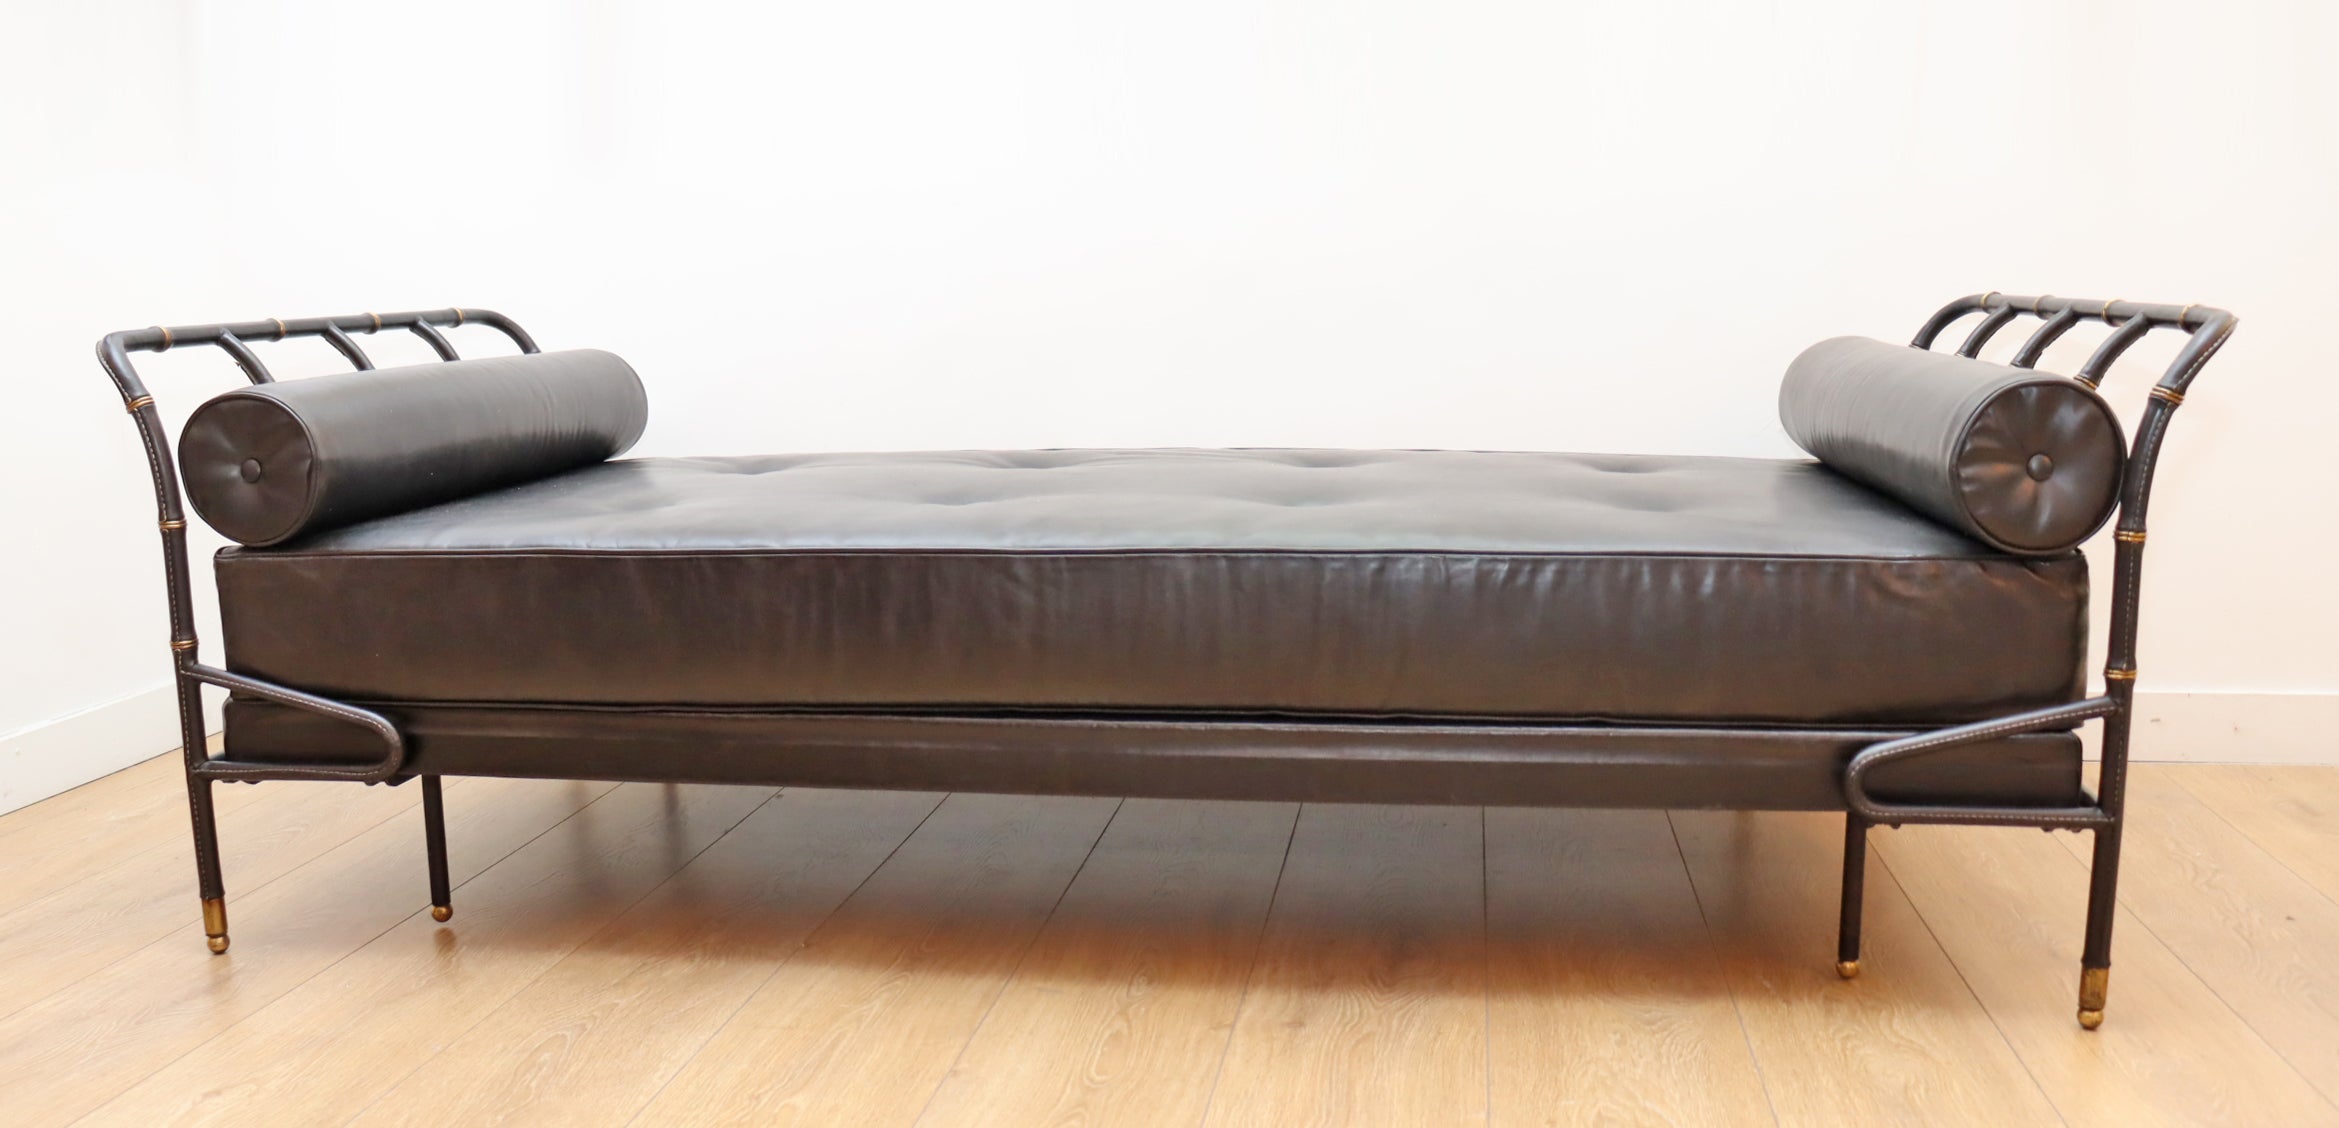 Daybed by Jacques Adnet black stitched leather and brass 
France circa 1950
Excellent condition, wear consistent with wear and use
Upholstered with black leather
Available to view in-situ in our Miami gallery